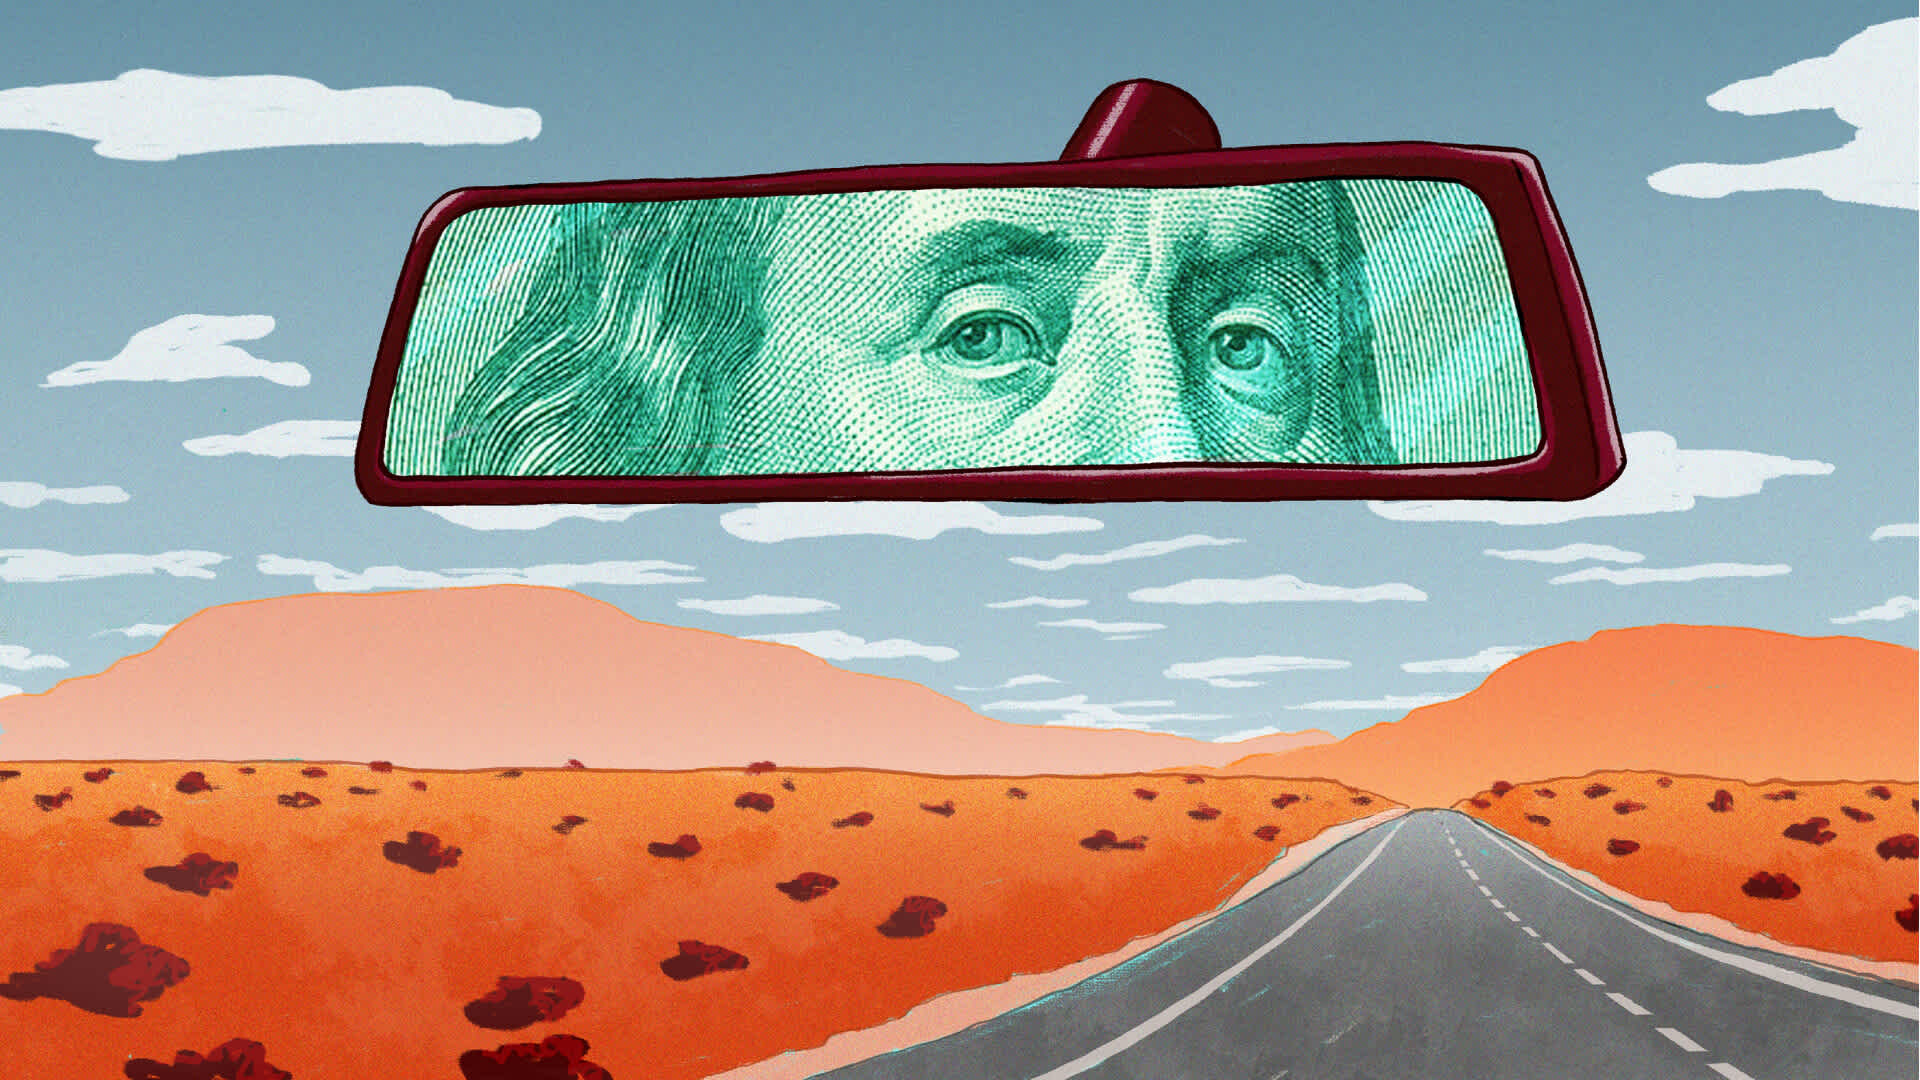 Benjamin Franklin's eyes looking at the viewer in the reflection of the rearview mirror.